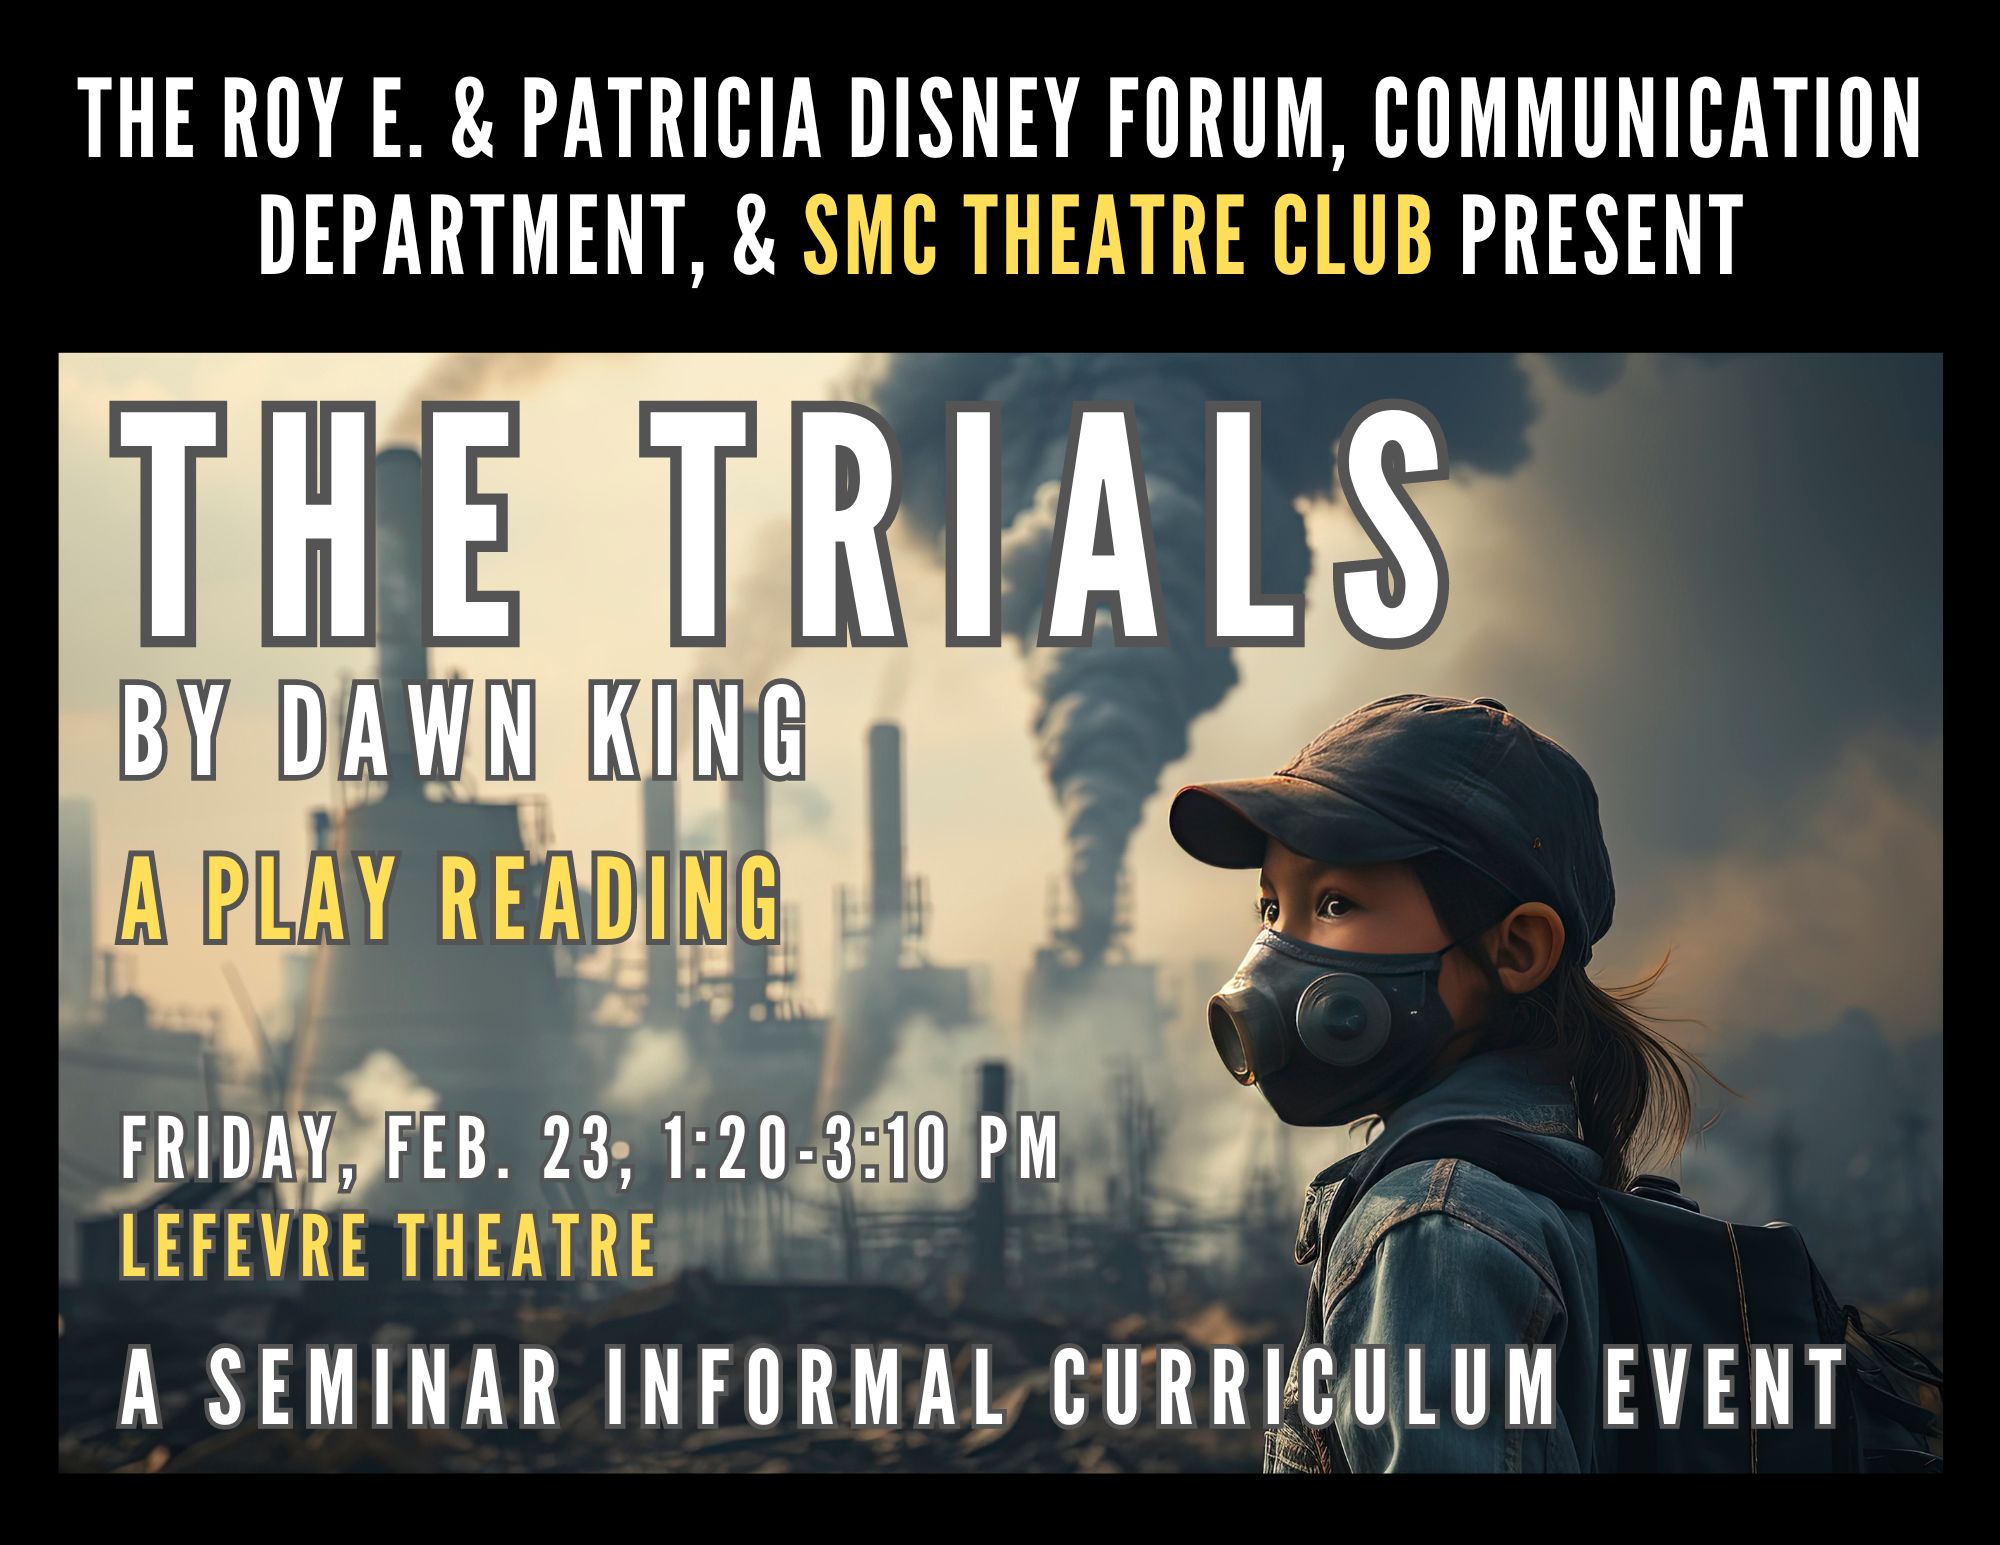 Flyer for The Trials play reading by Dawn King with a photo of a girl with a gas mask and pollution in background